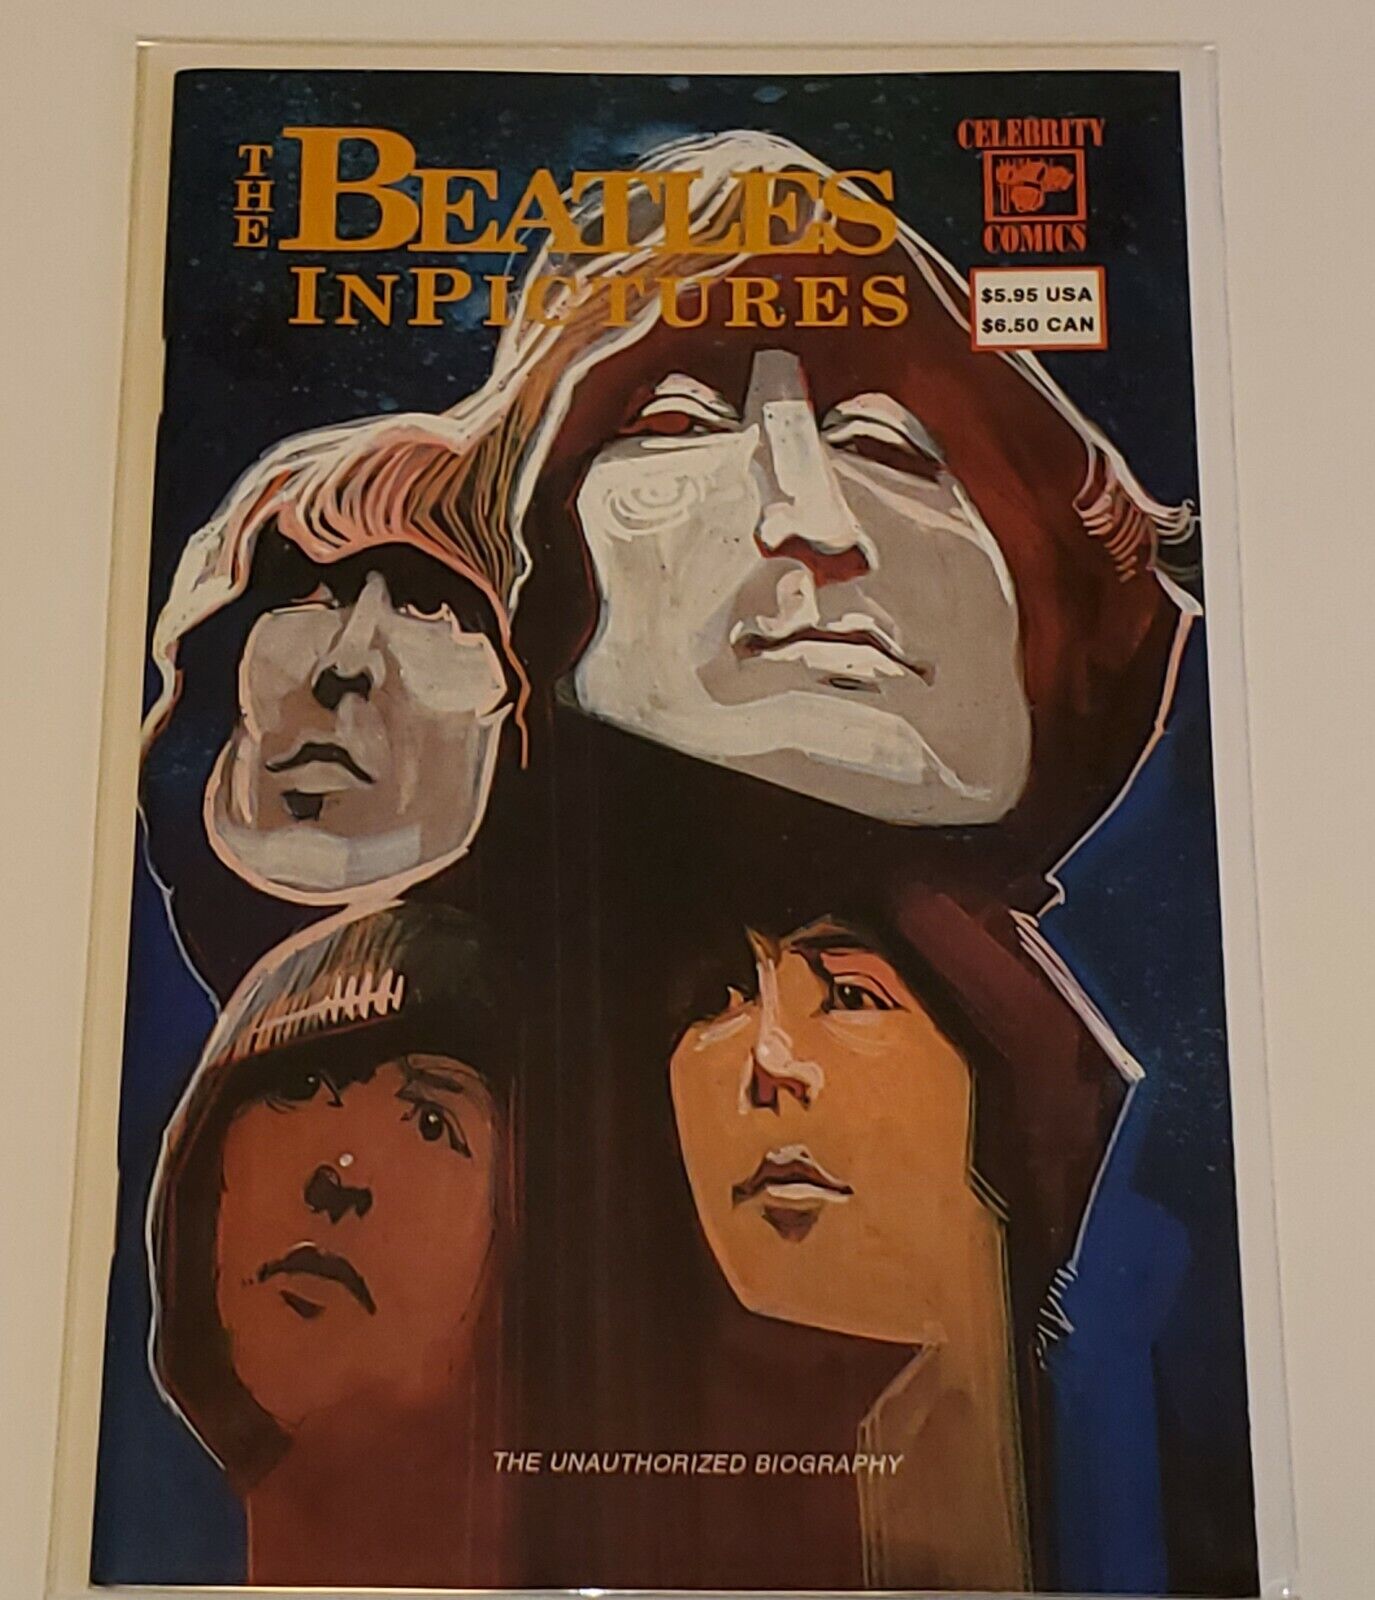 The Beatles in Pictures # 1 (Celebrity 1992)  Very Fine 